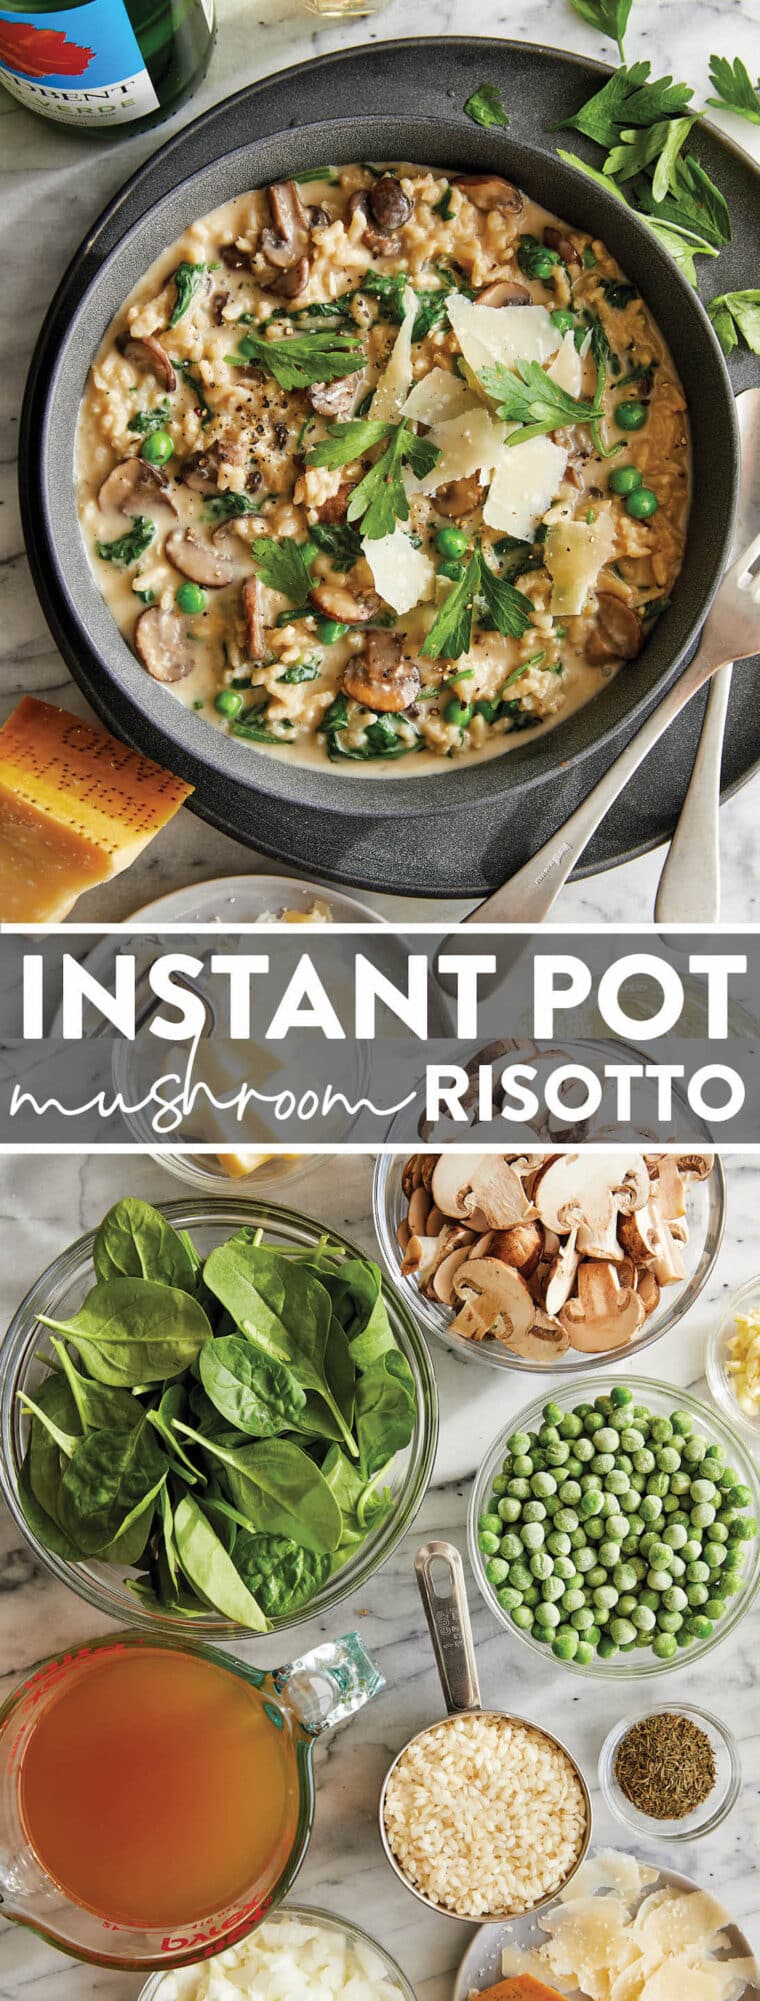 Everything You Need to Know About Crock-Pot's Version of the Instant Pot -  Brit + Co